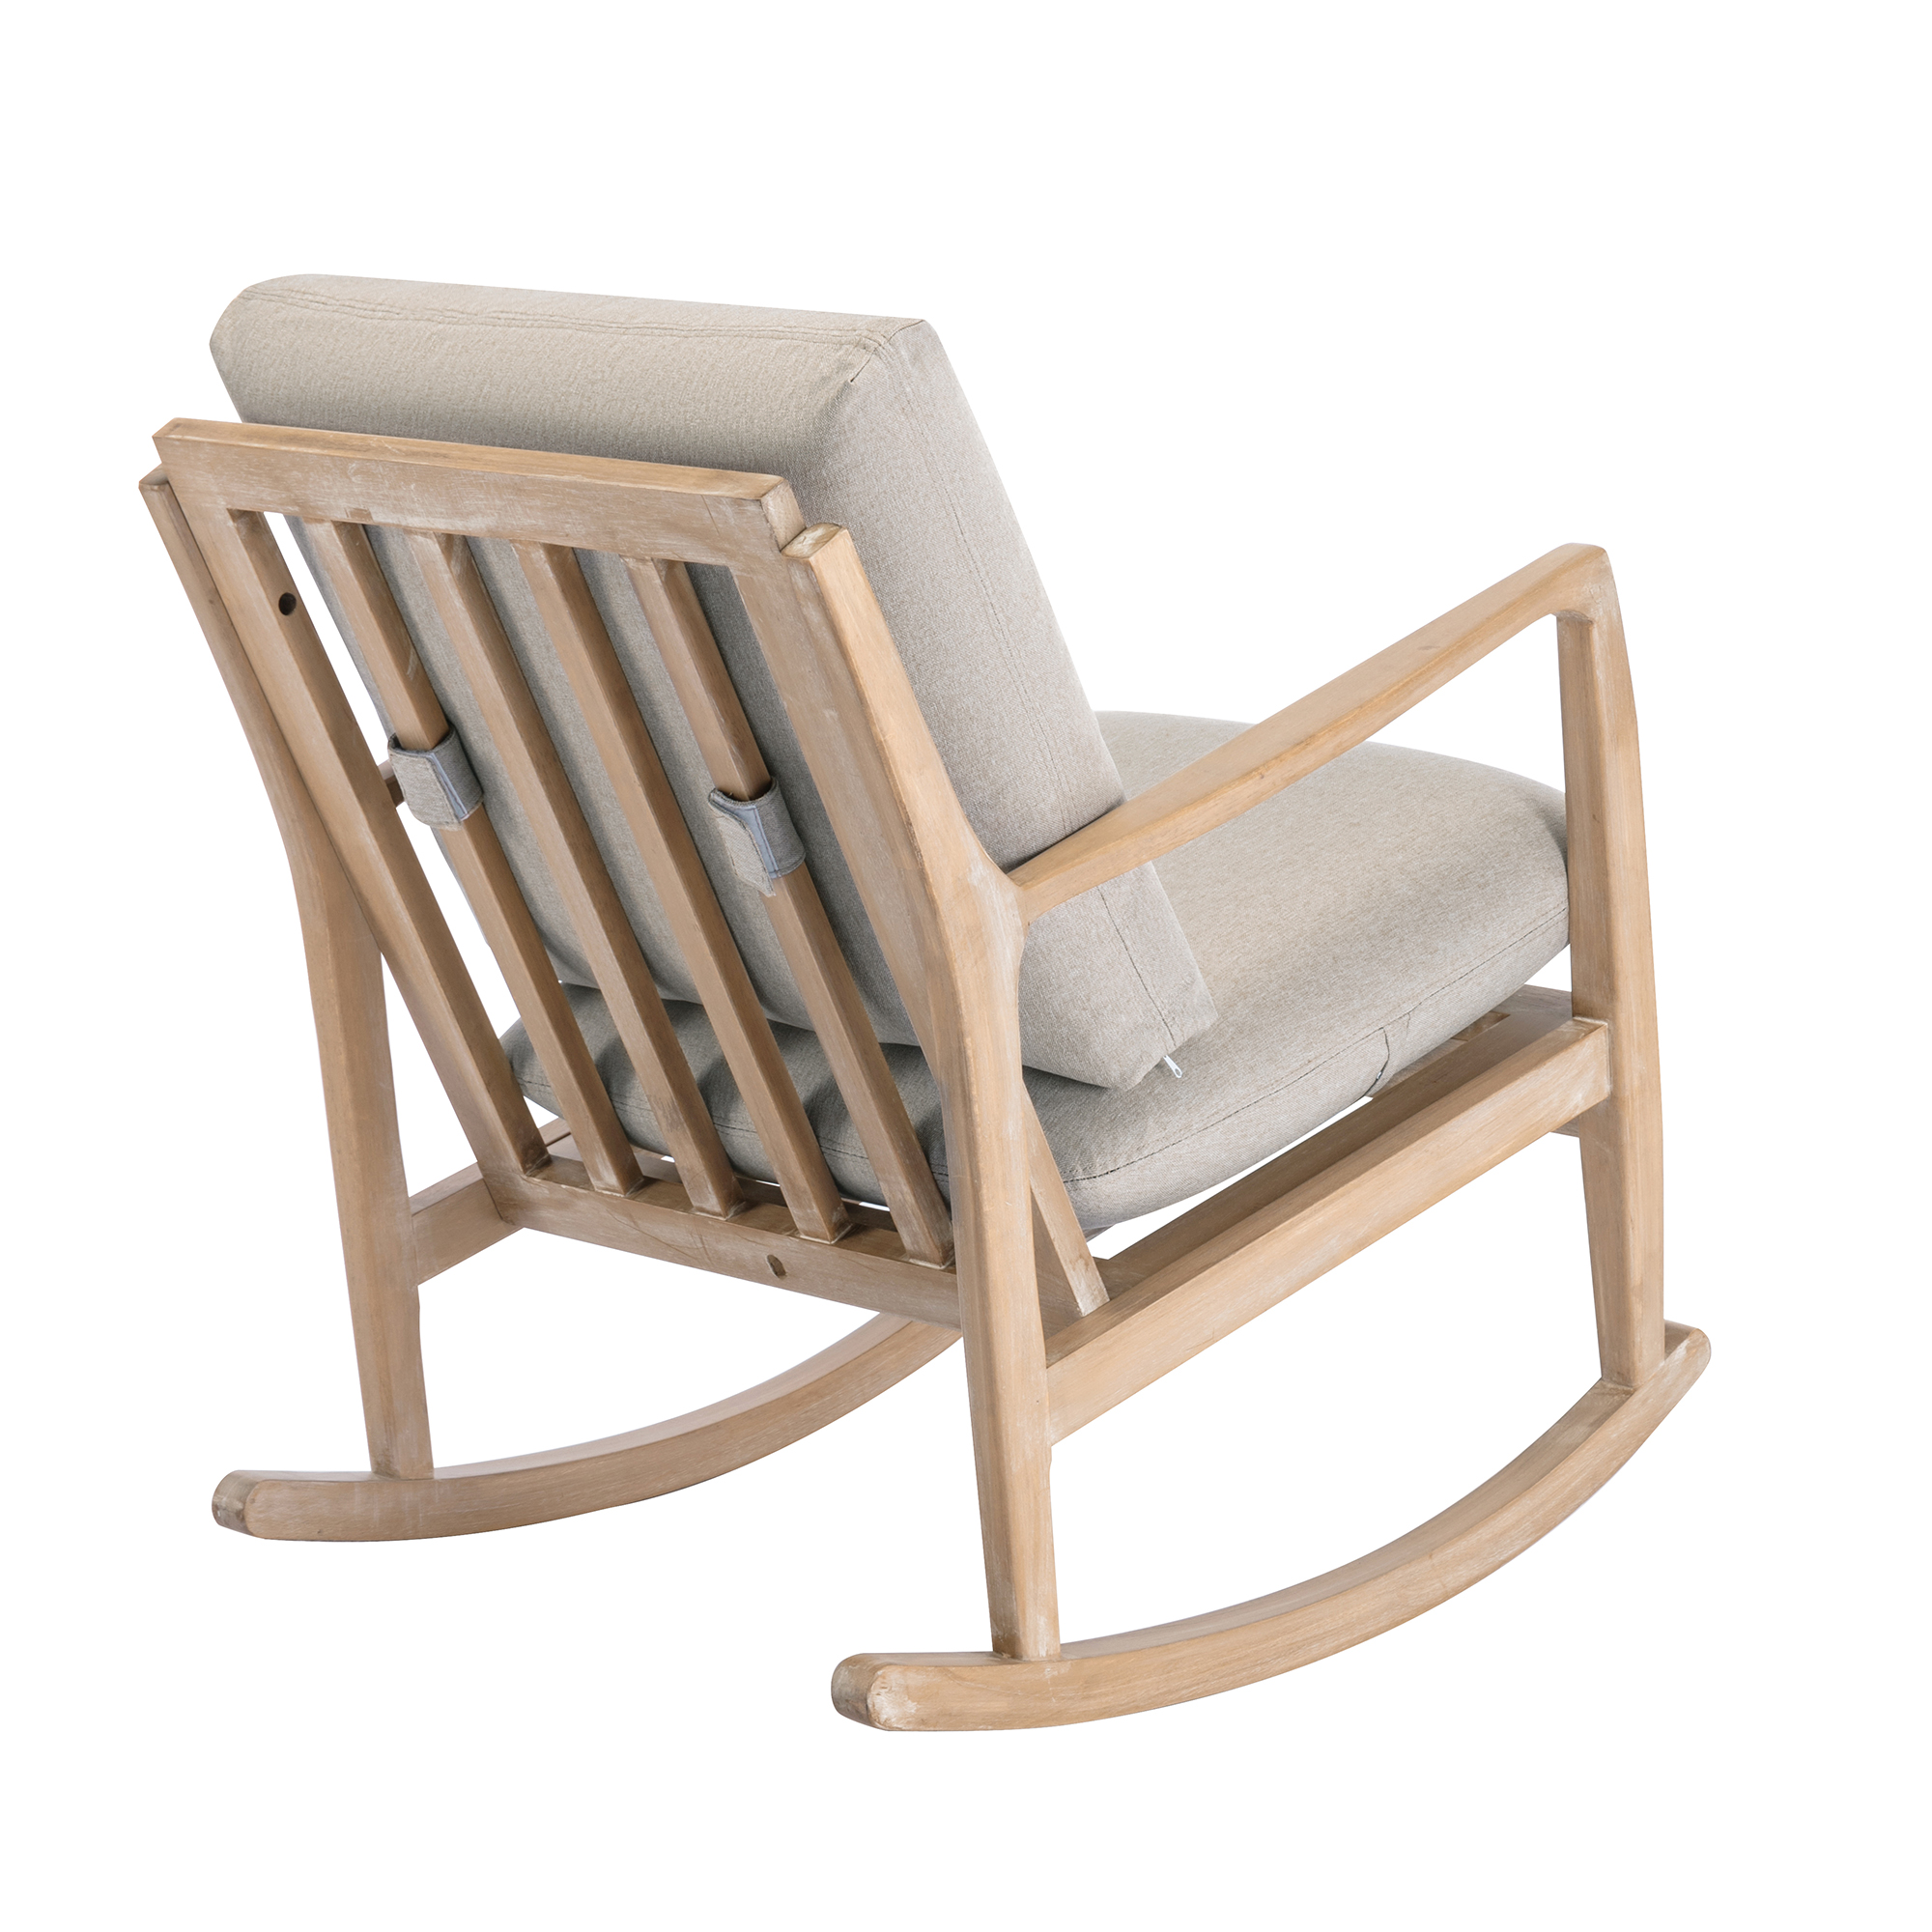 Solid Wood Rocking Chair, Linen Fabric Upholstered Comfy Accent Chair for Porch, Garden Patio, Balcony, Living Room and Bedroom, Beige - image 4 of 9